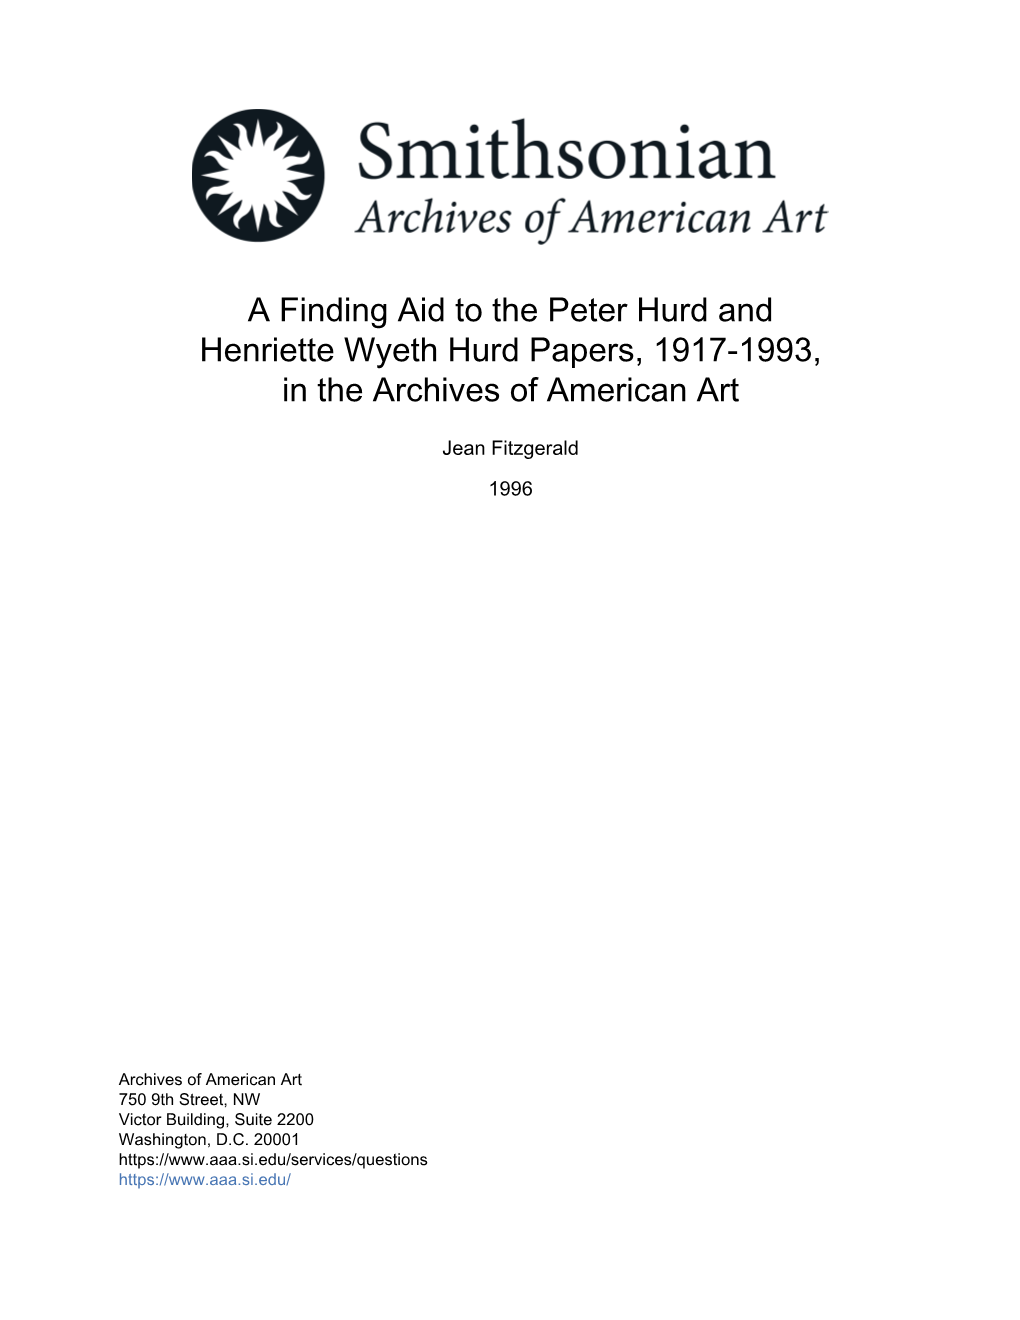 A Finding Aid to the Peter Hurd and Henriette Wyeth Hurd Papers, 1917-1993, in the Archives of American Art